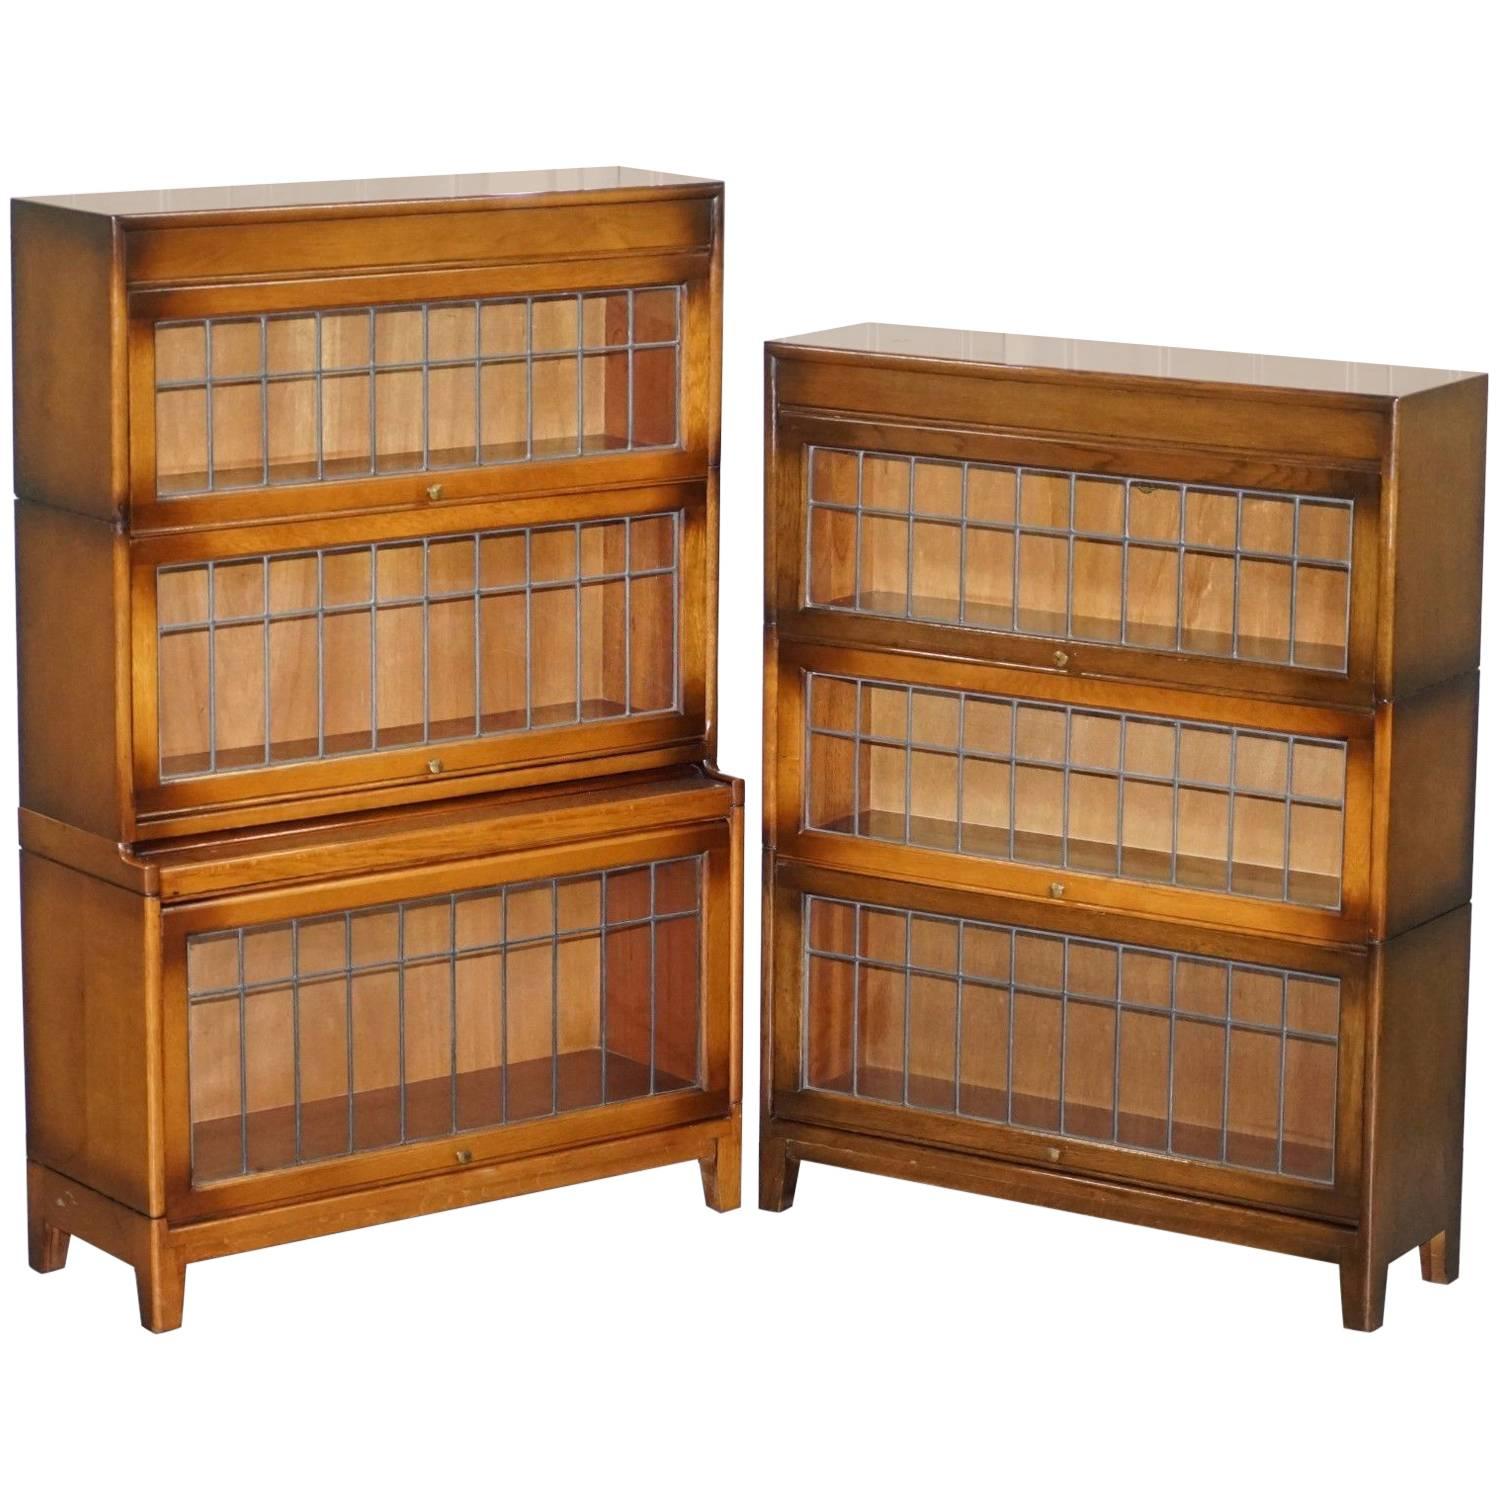 Pair of Dwarf Oak Gunn Stacking Legal Library Solicitors Bookcases Model Angus